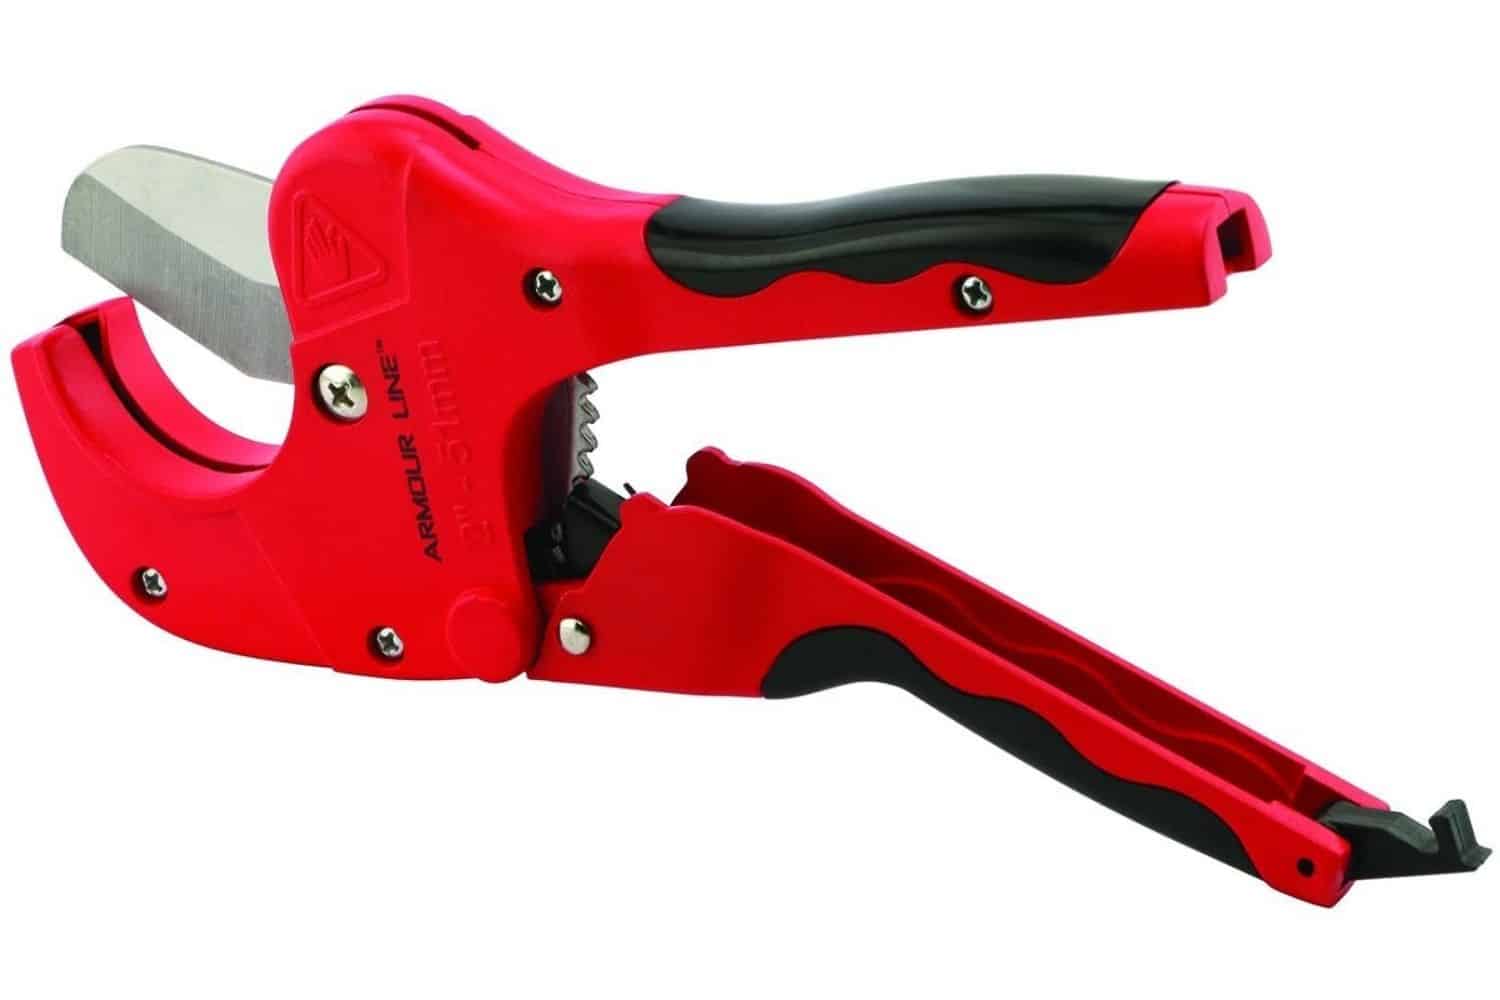 Armour Line RP77152 PVC Pipe Cutter Review